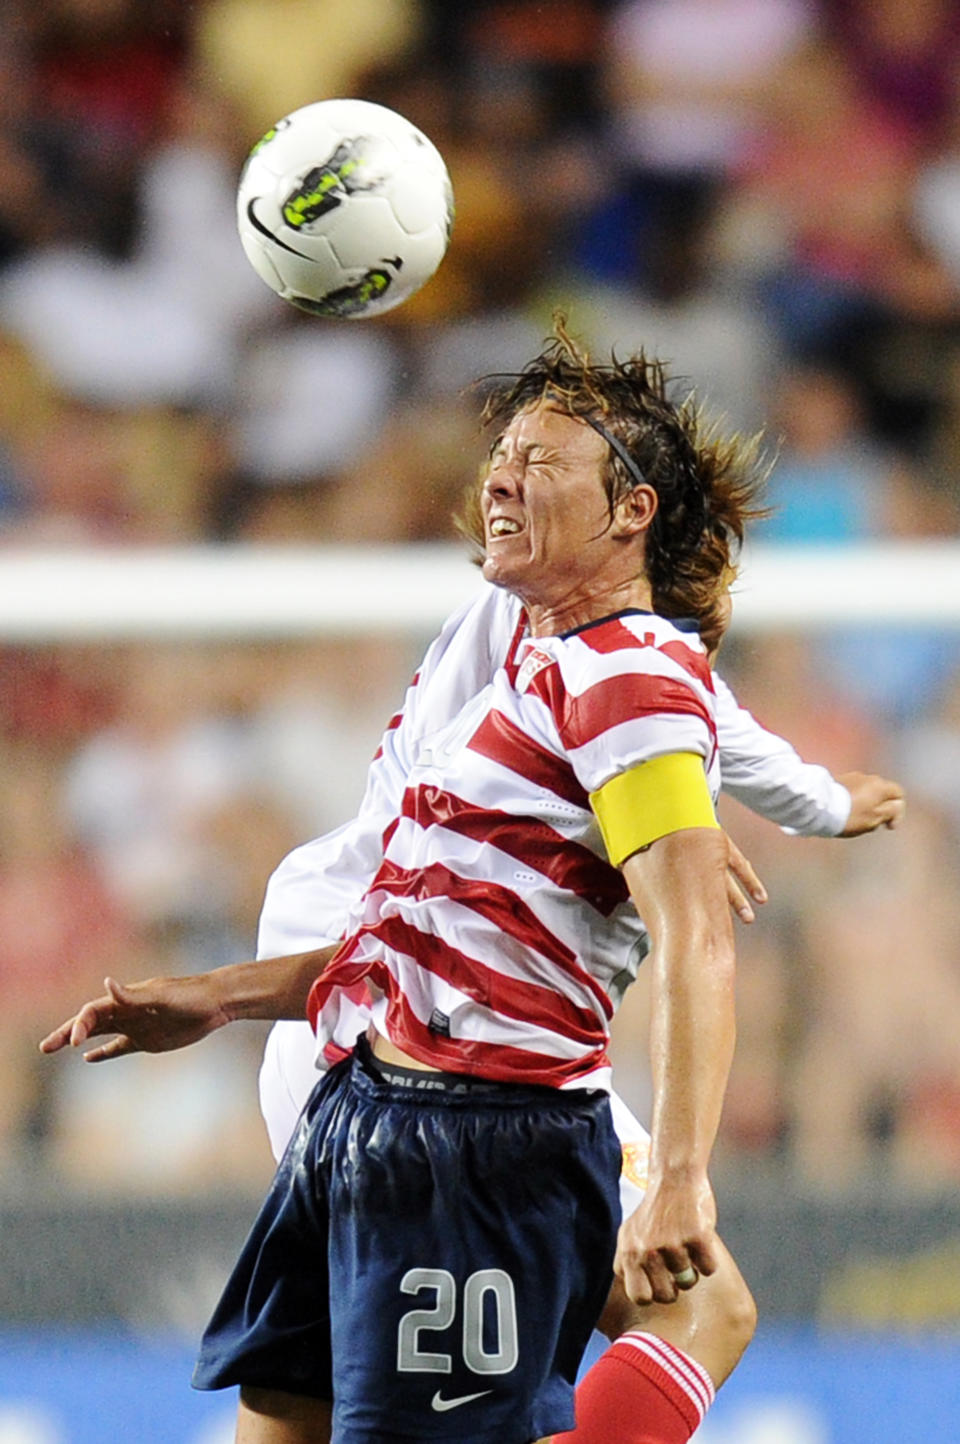 Abby Wambach heads the ball during the game against China at PPL Park on May 27, 2012, in Chester, Penn. The U.S. won 4-1. (Photo by Drew Hallowell/Getty Images)